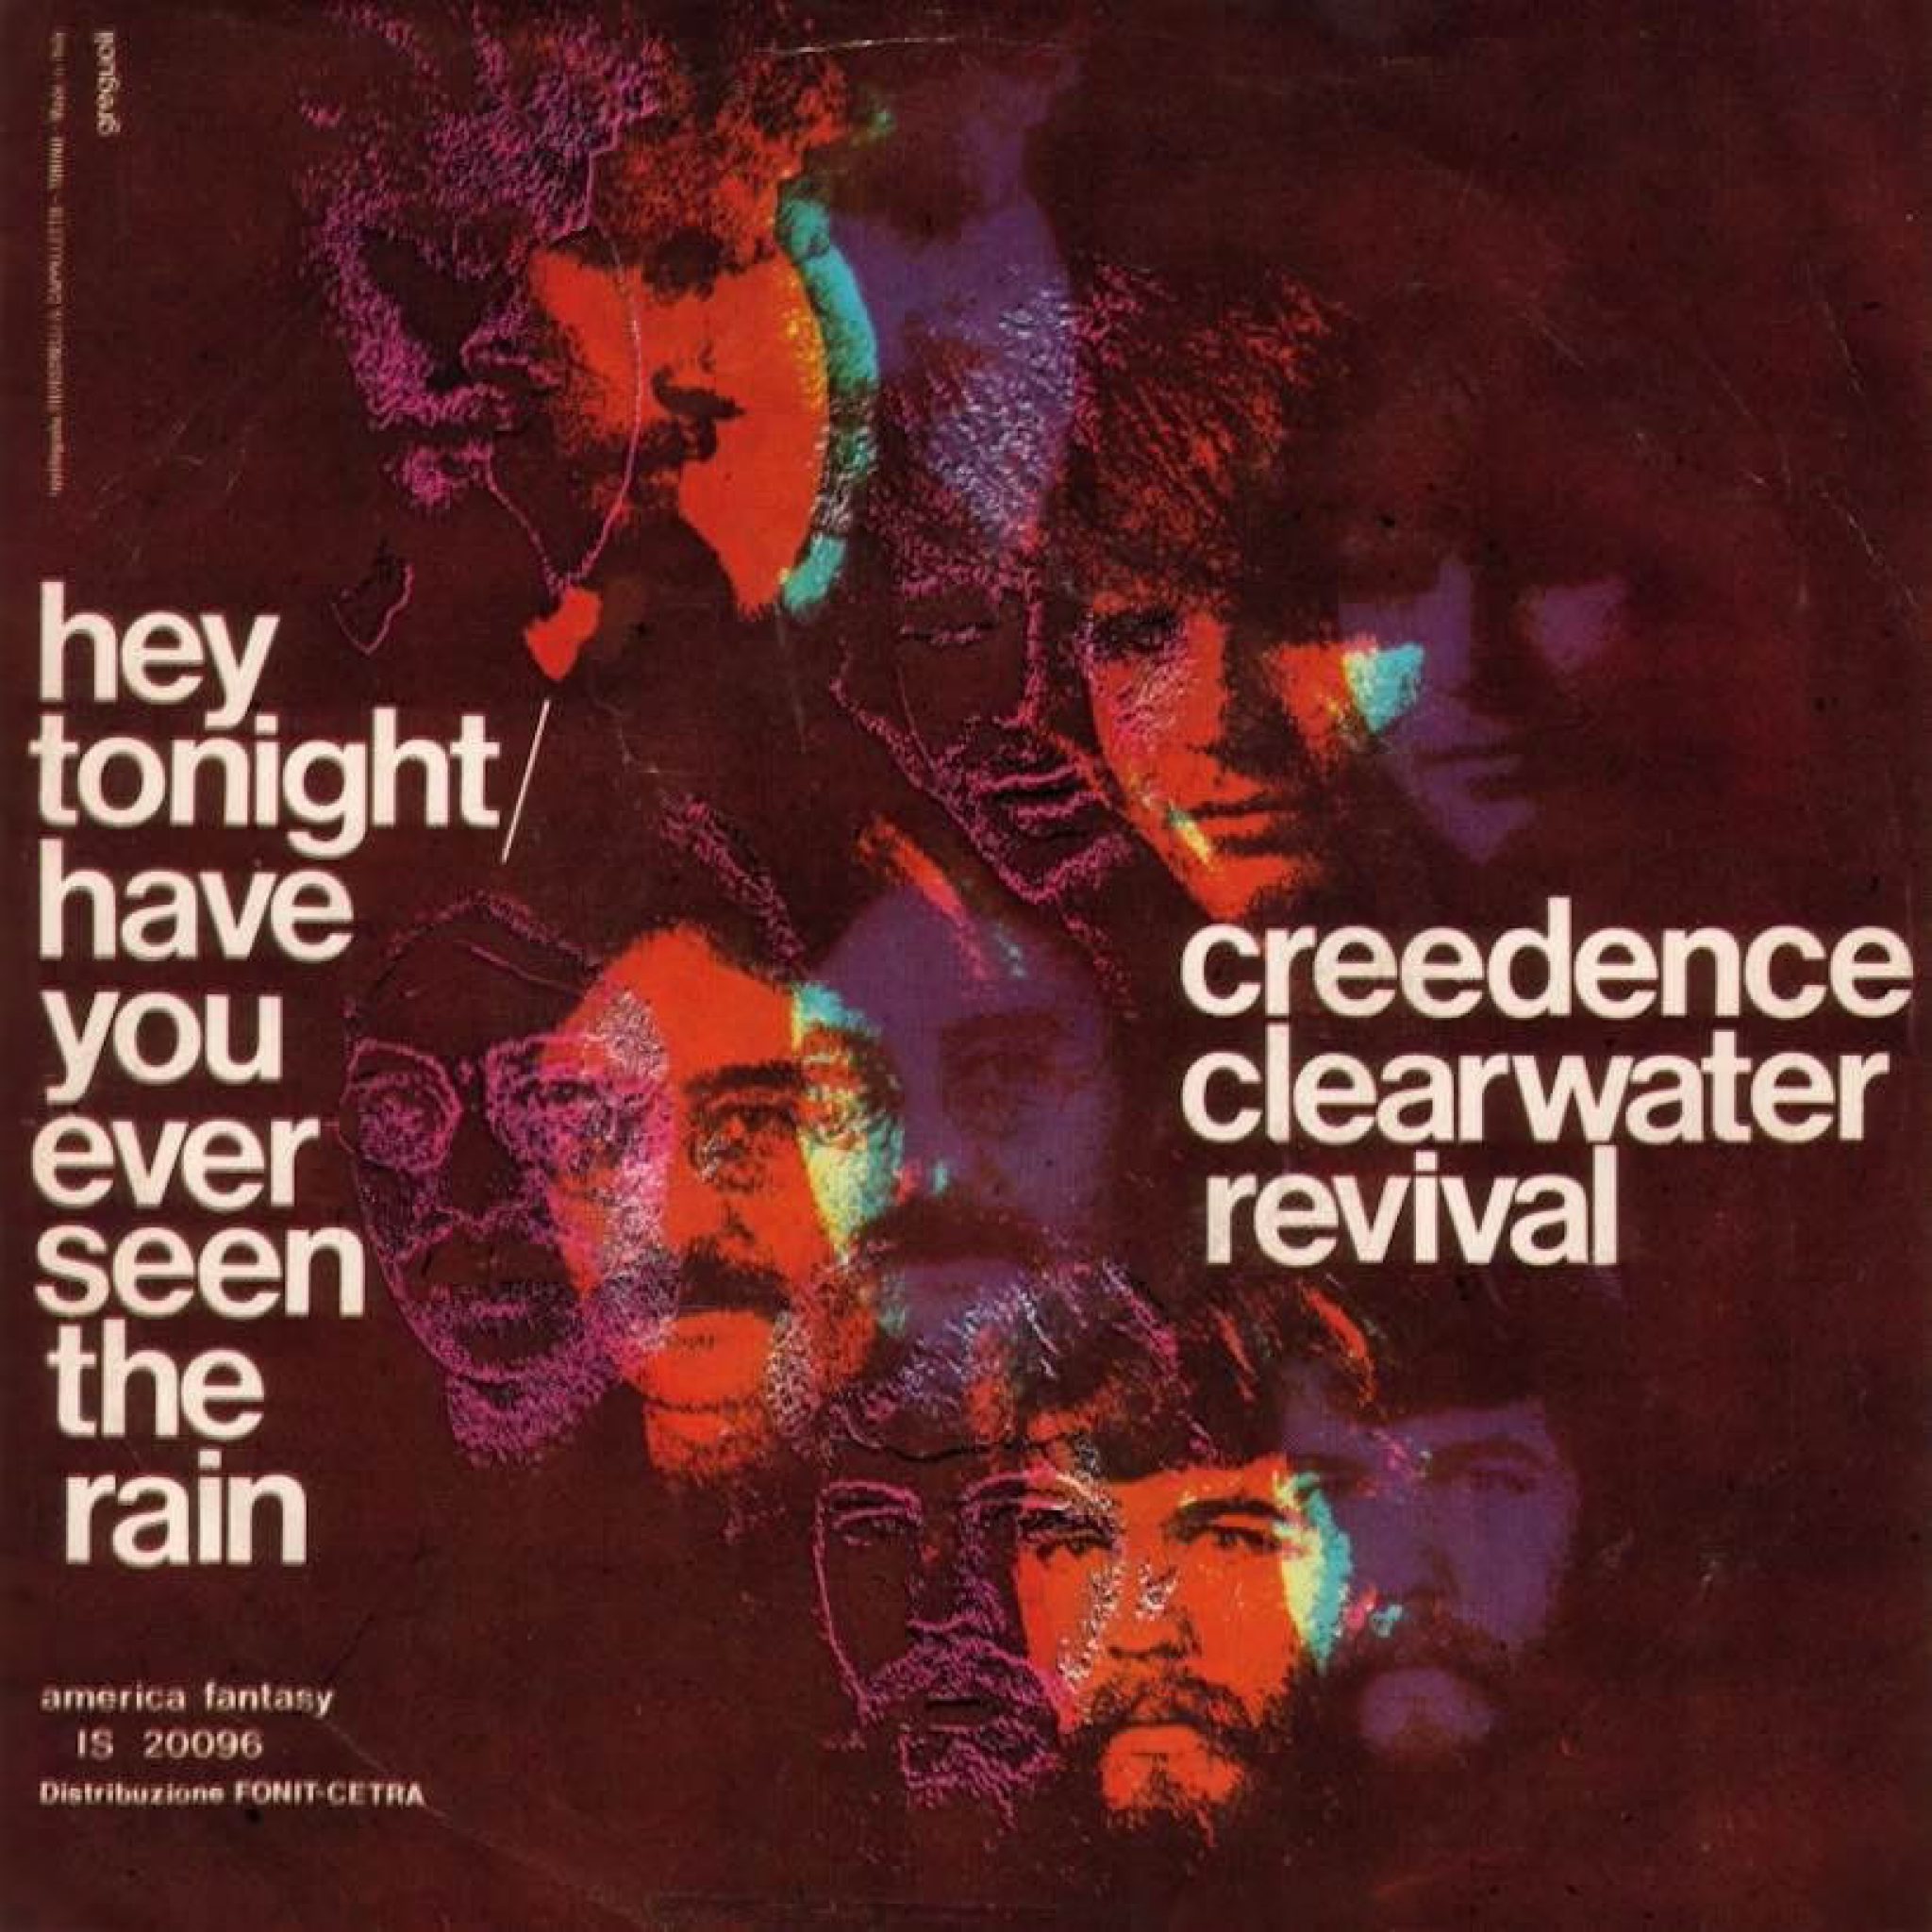 Creedence rain. Creedence Clearwater Revival. Creedence Clearwater Revival - have you ever seen the Rain. Have you ever seen the Rain Криденс. Creedence Clearwater Revival - have you ever seen the Rain (1970).